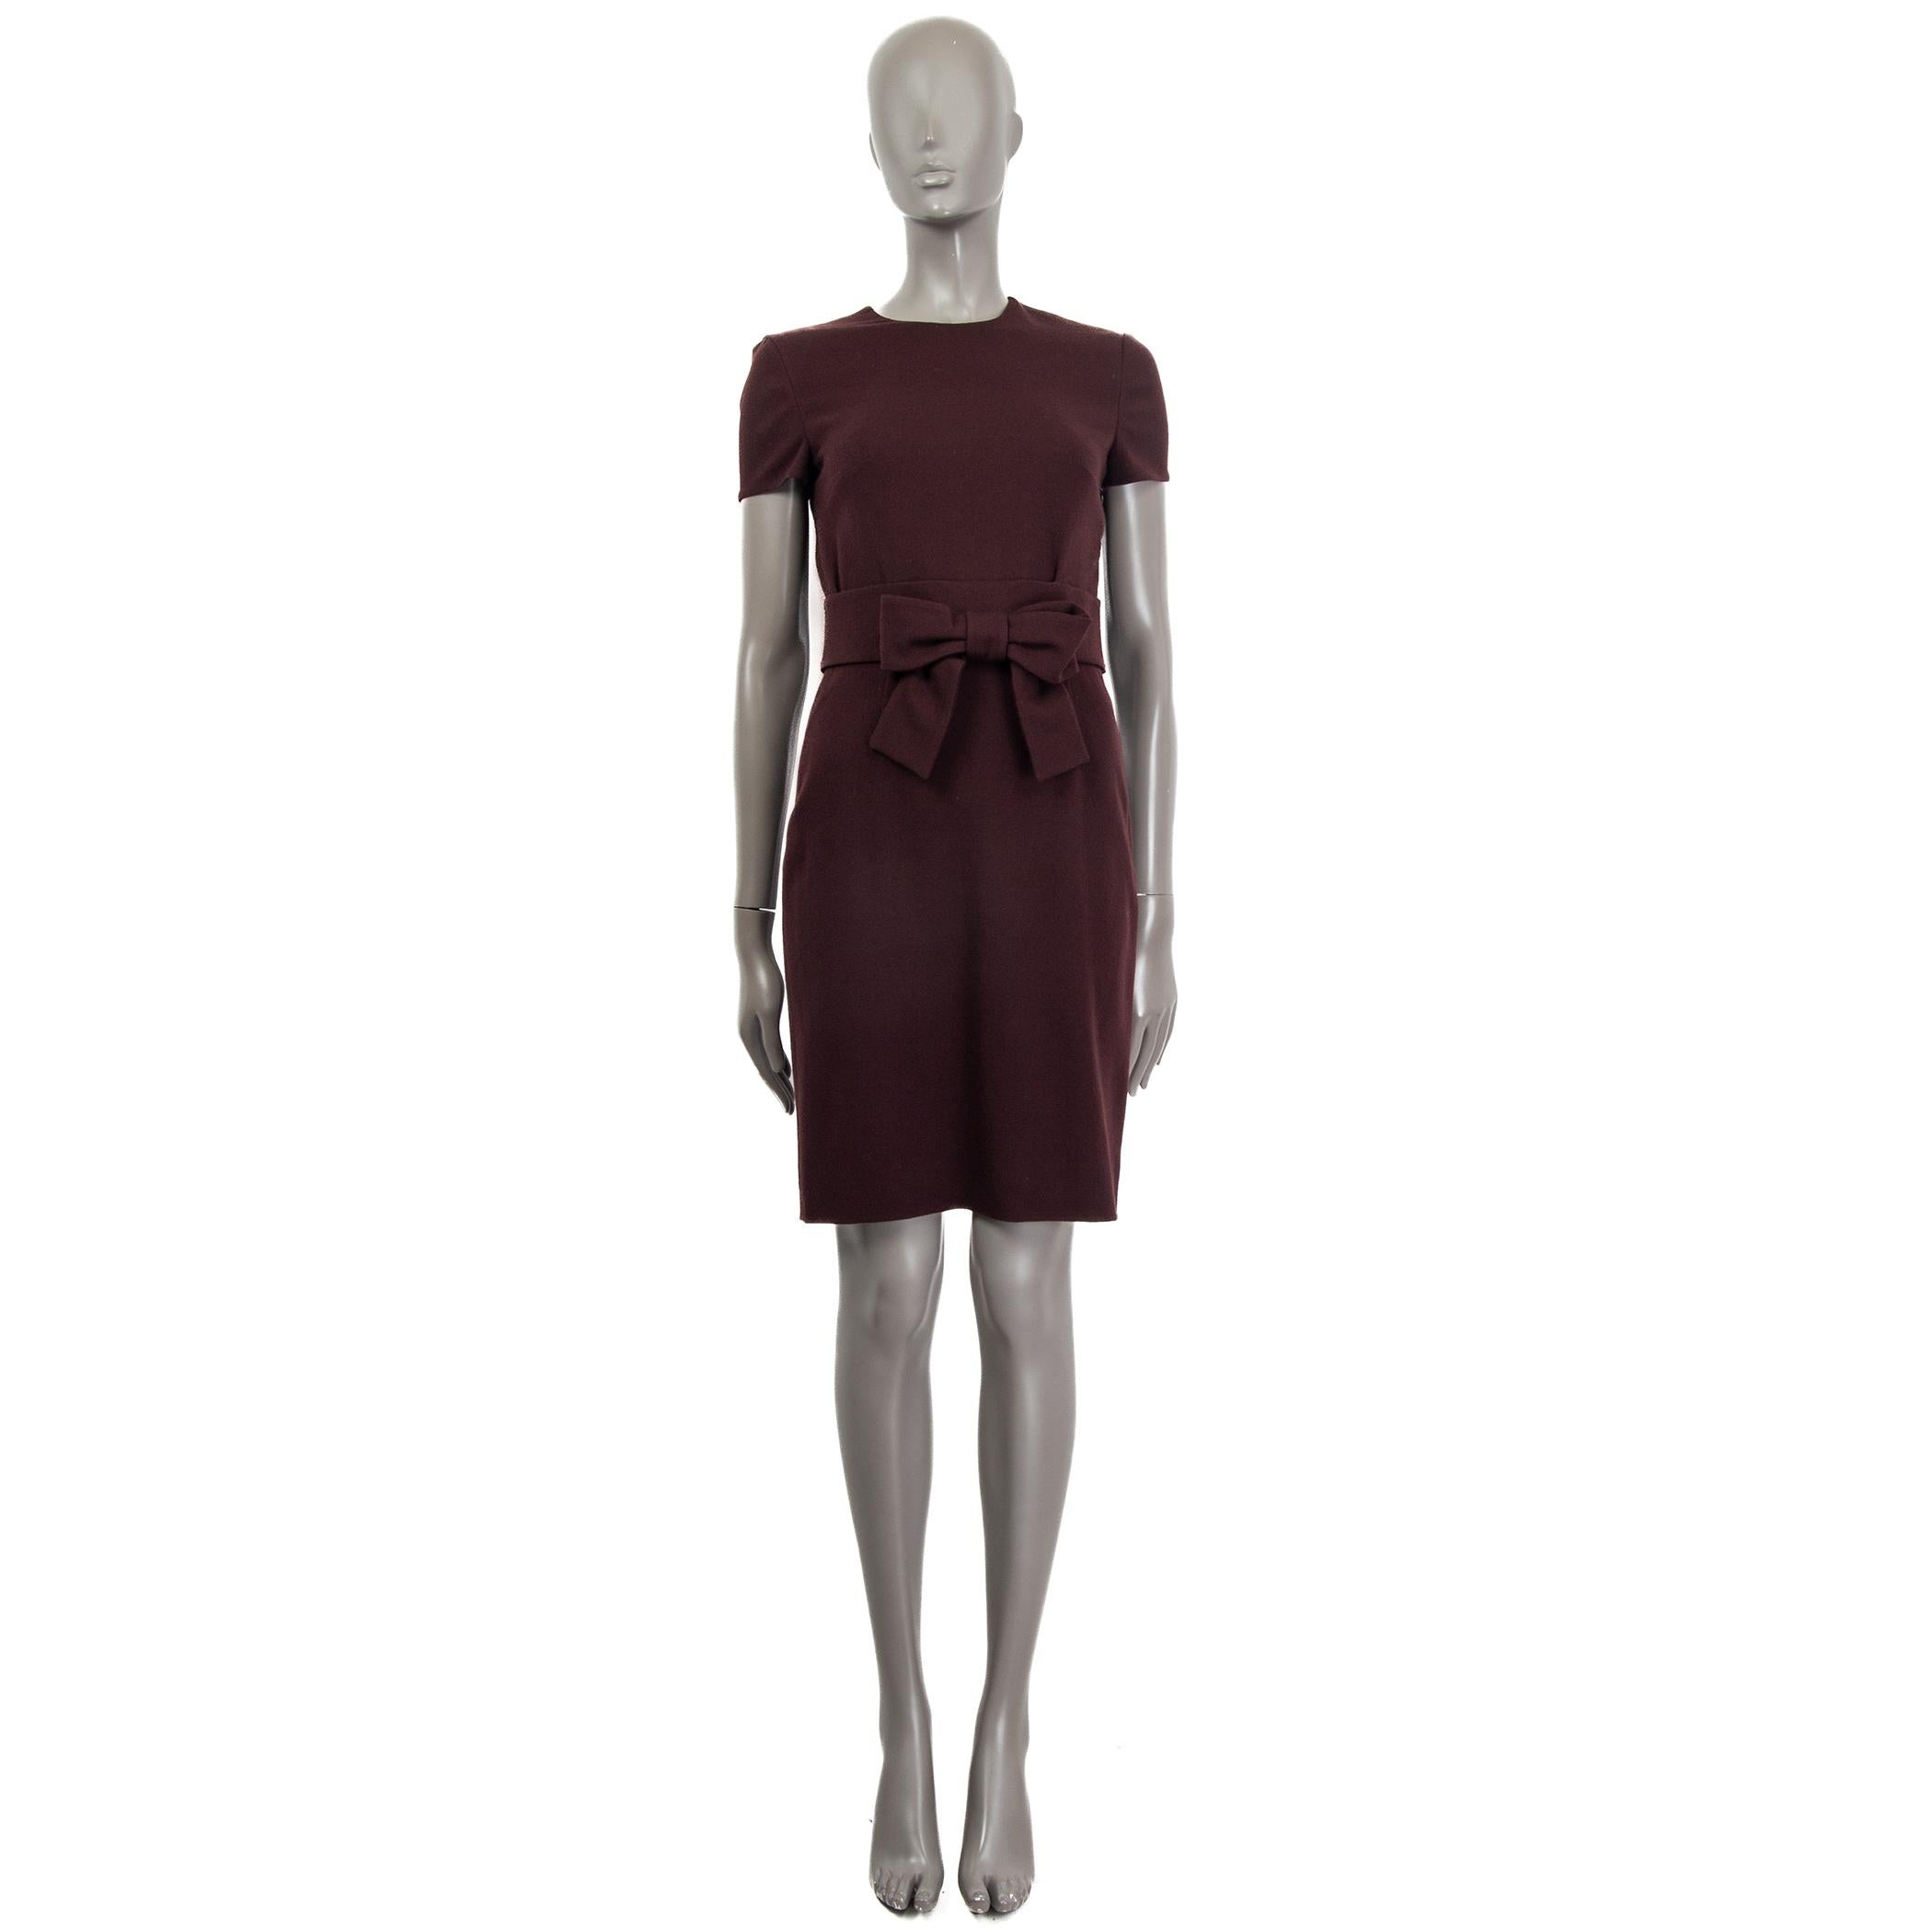 100% authentic Valentino short sleeve knee-length dress in eggplant fleece wool (98%) and elastane (2%). Features a mesh on the front. Opens with a button on the back and a concealed zipper at the side. Lined in eggplant polyester (100%). Has been